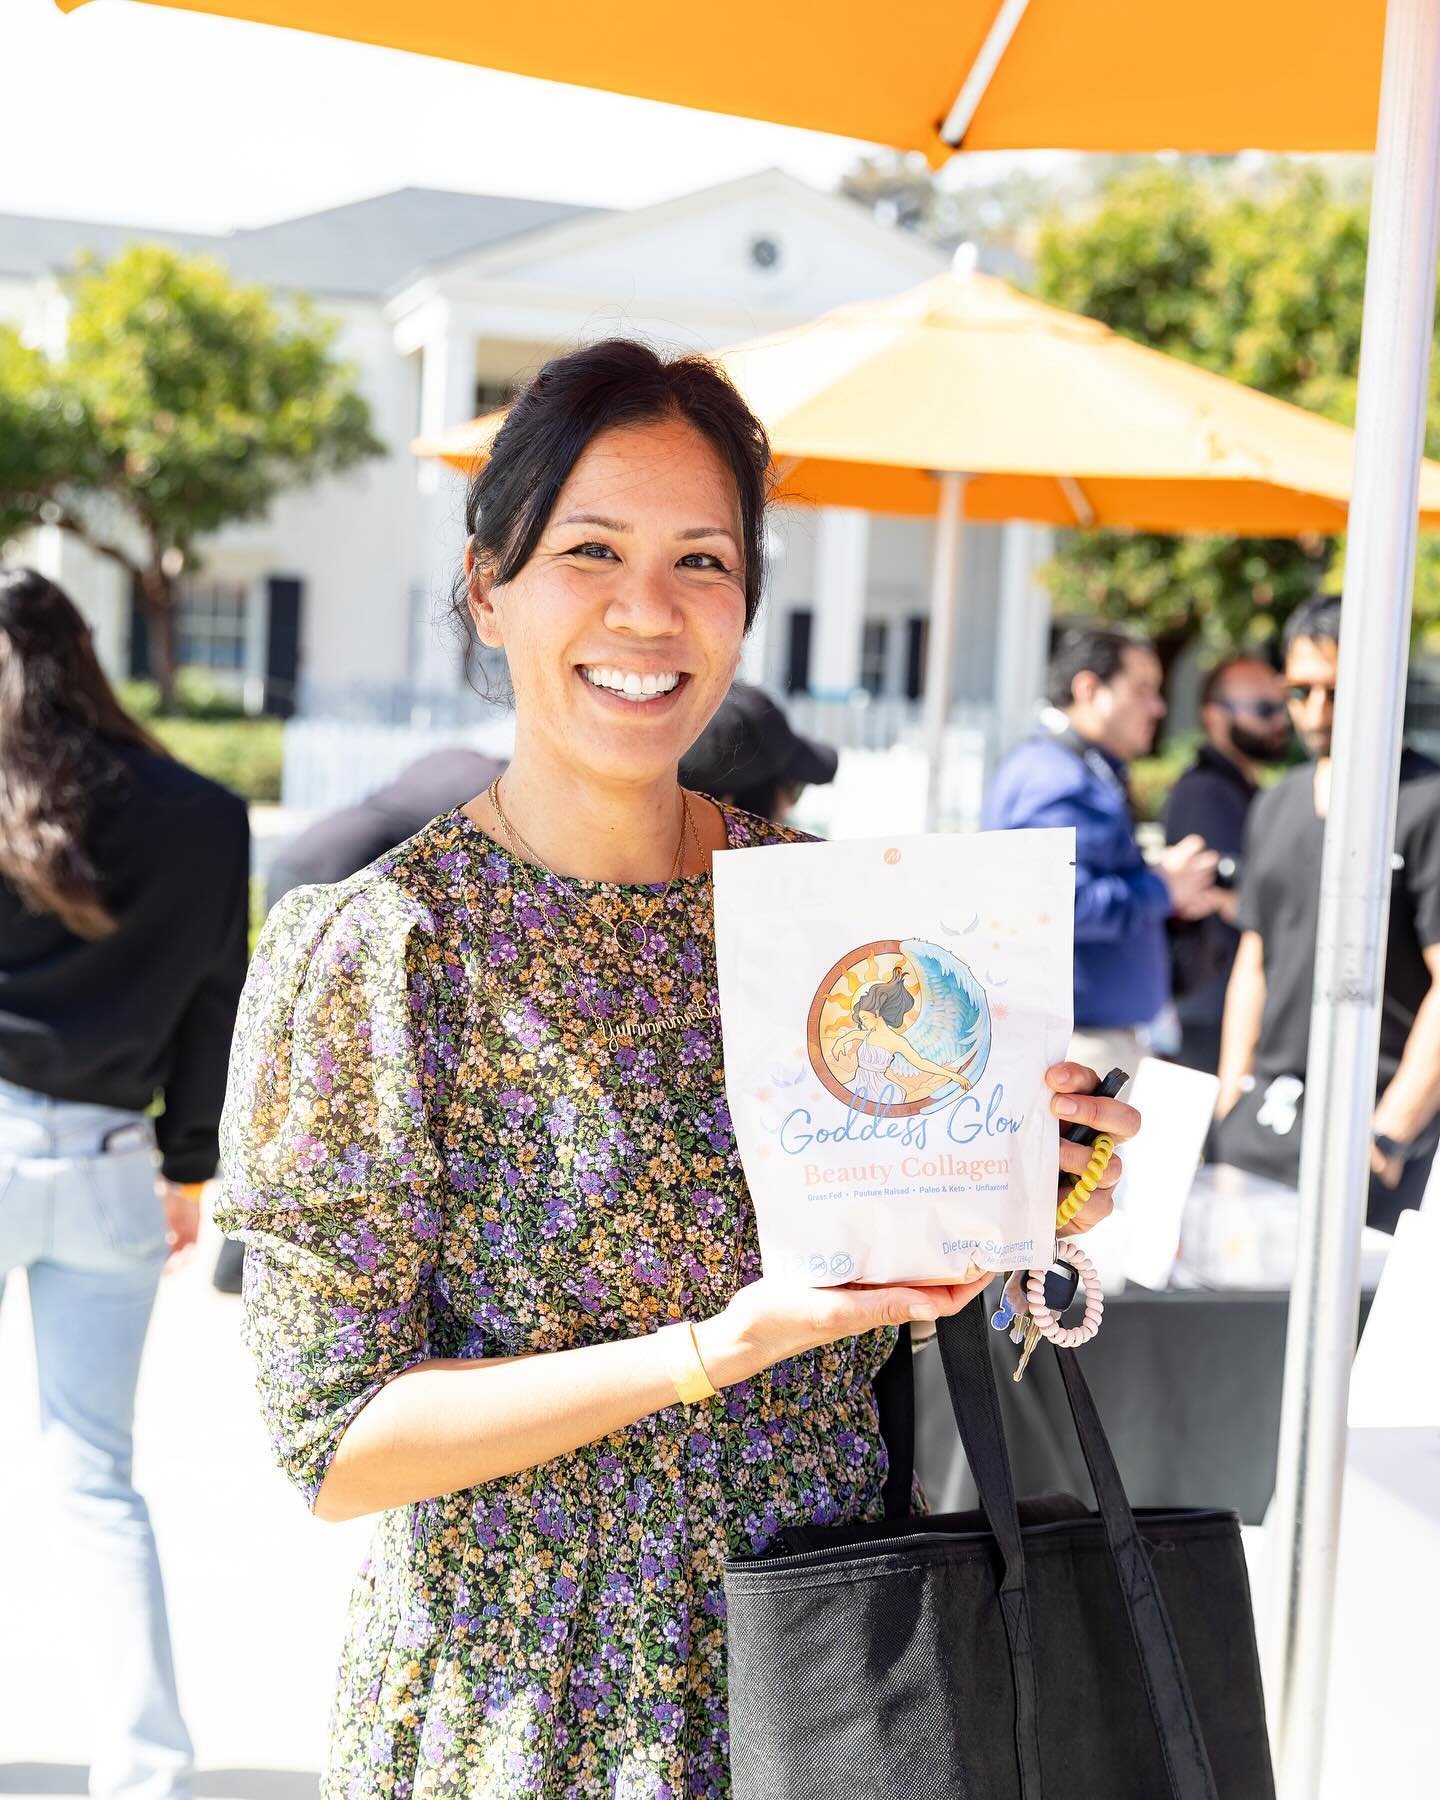 We are sharing some of the cool products at the ✨10th Annual SoCal Wellness Summit this #WellnessWednesday! 

Swipe through to see some of the products from our partners from baby to menopause, there was something for everyone!

✨Want EXCLUSIVE OFFER